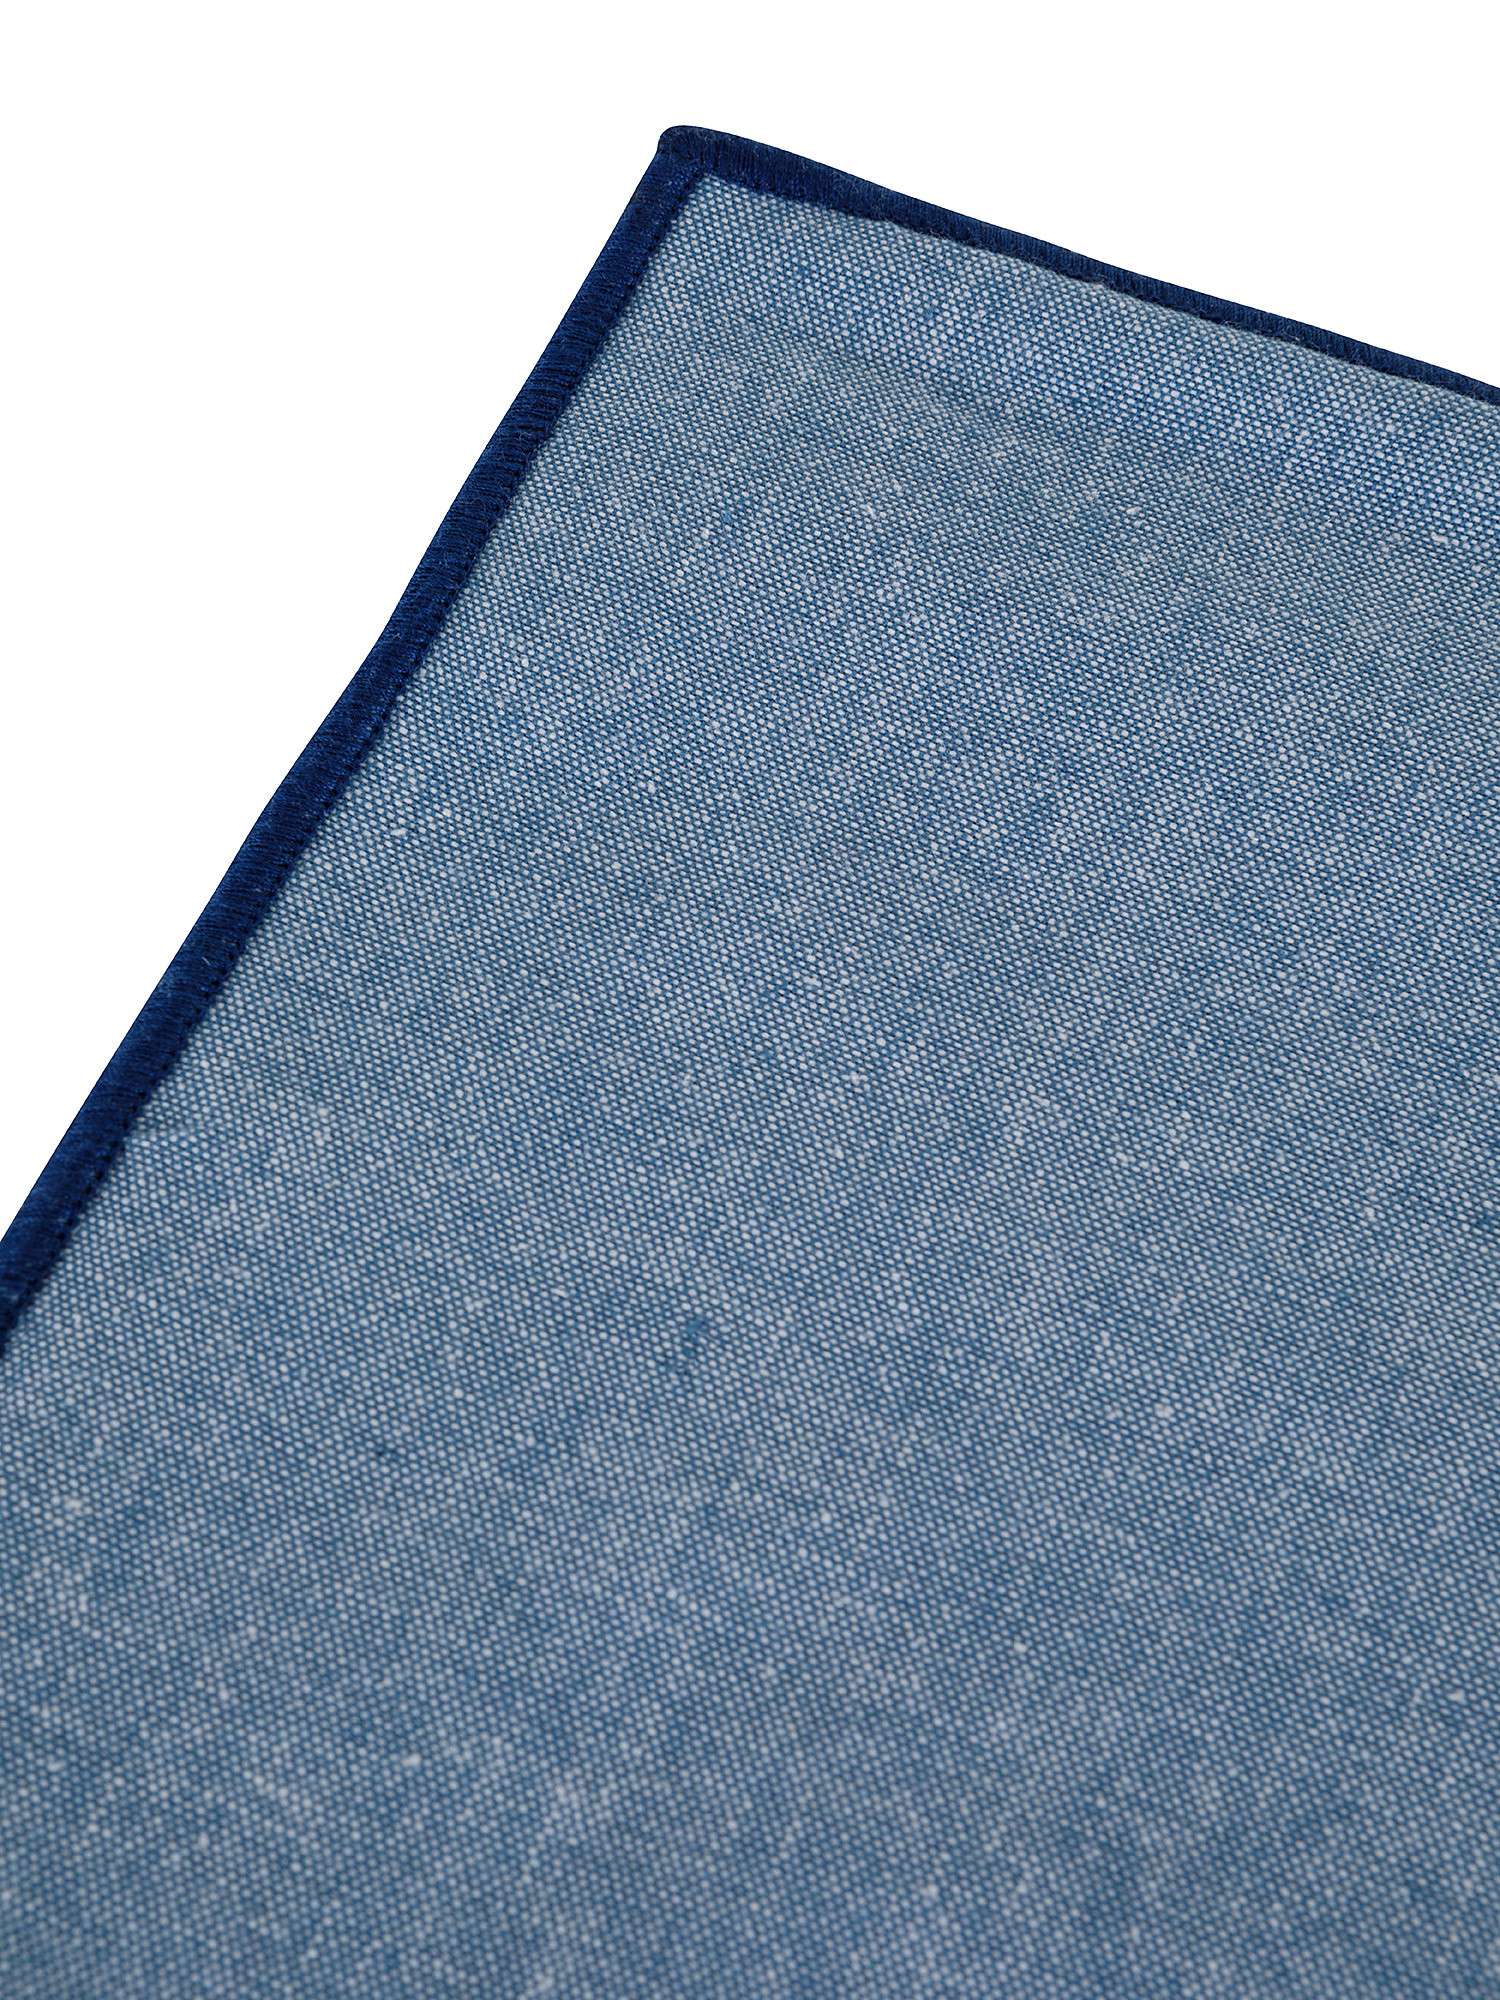 Chambre cotton placemat with contrasting hem, Blue, large image number 1